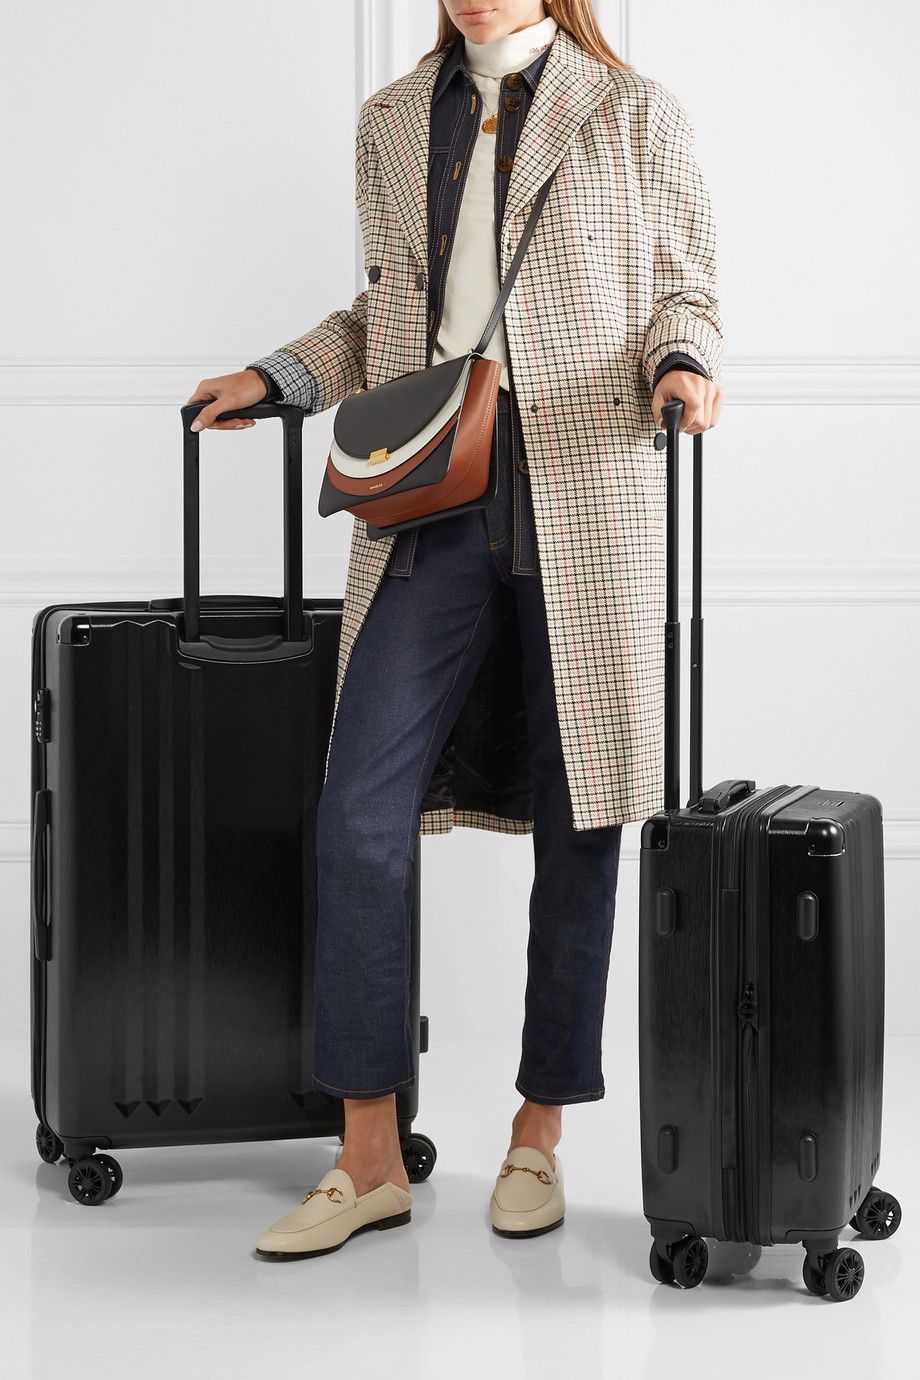 Our Editor's Holiday Travel Packing List | Who What Wear